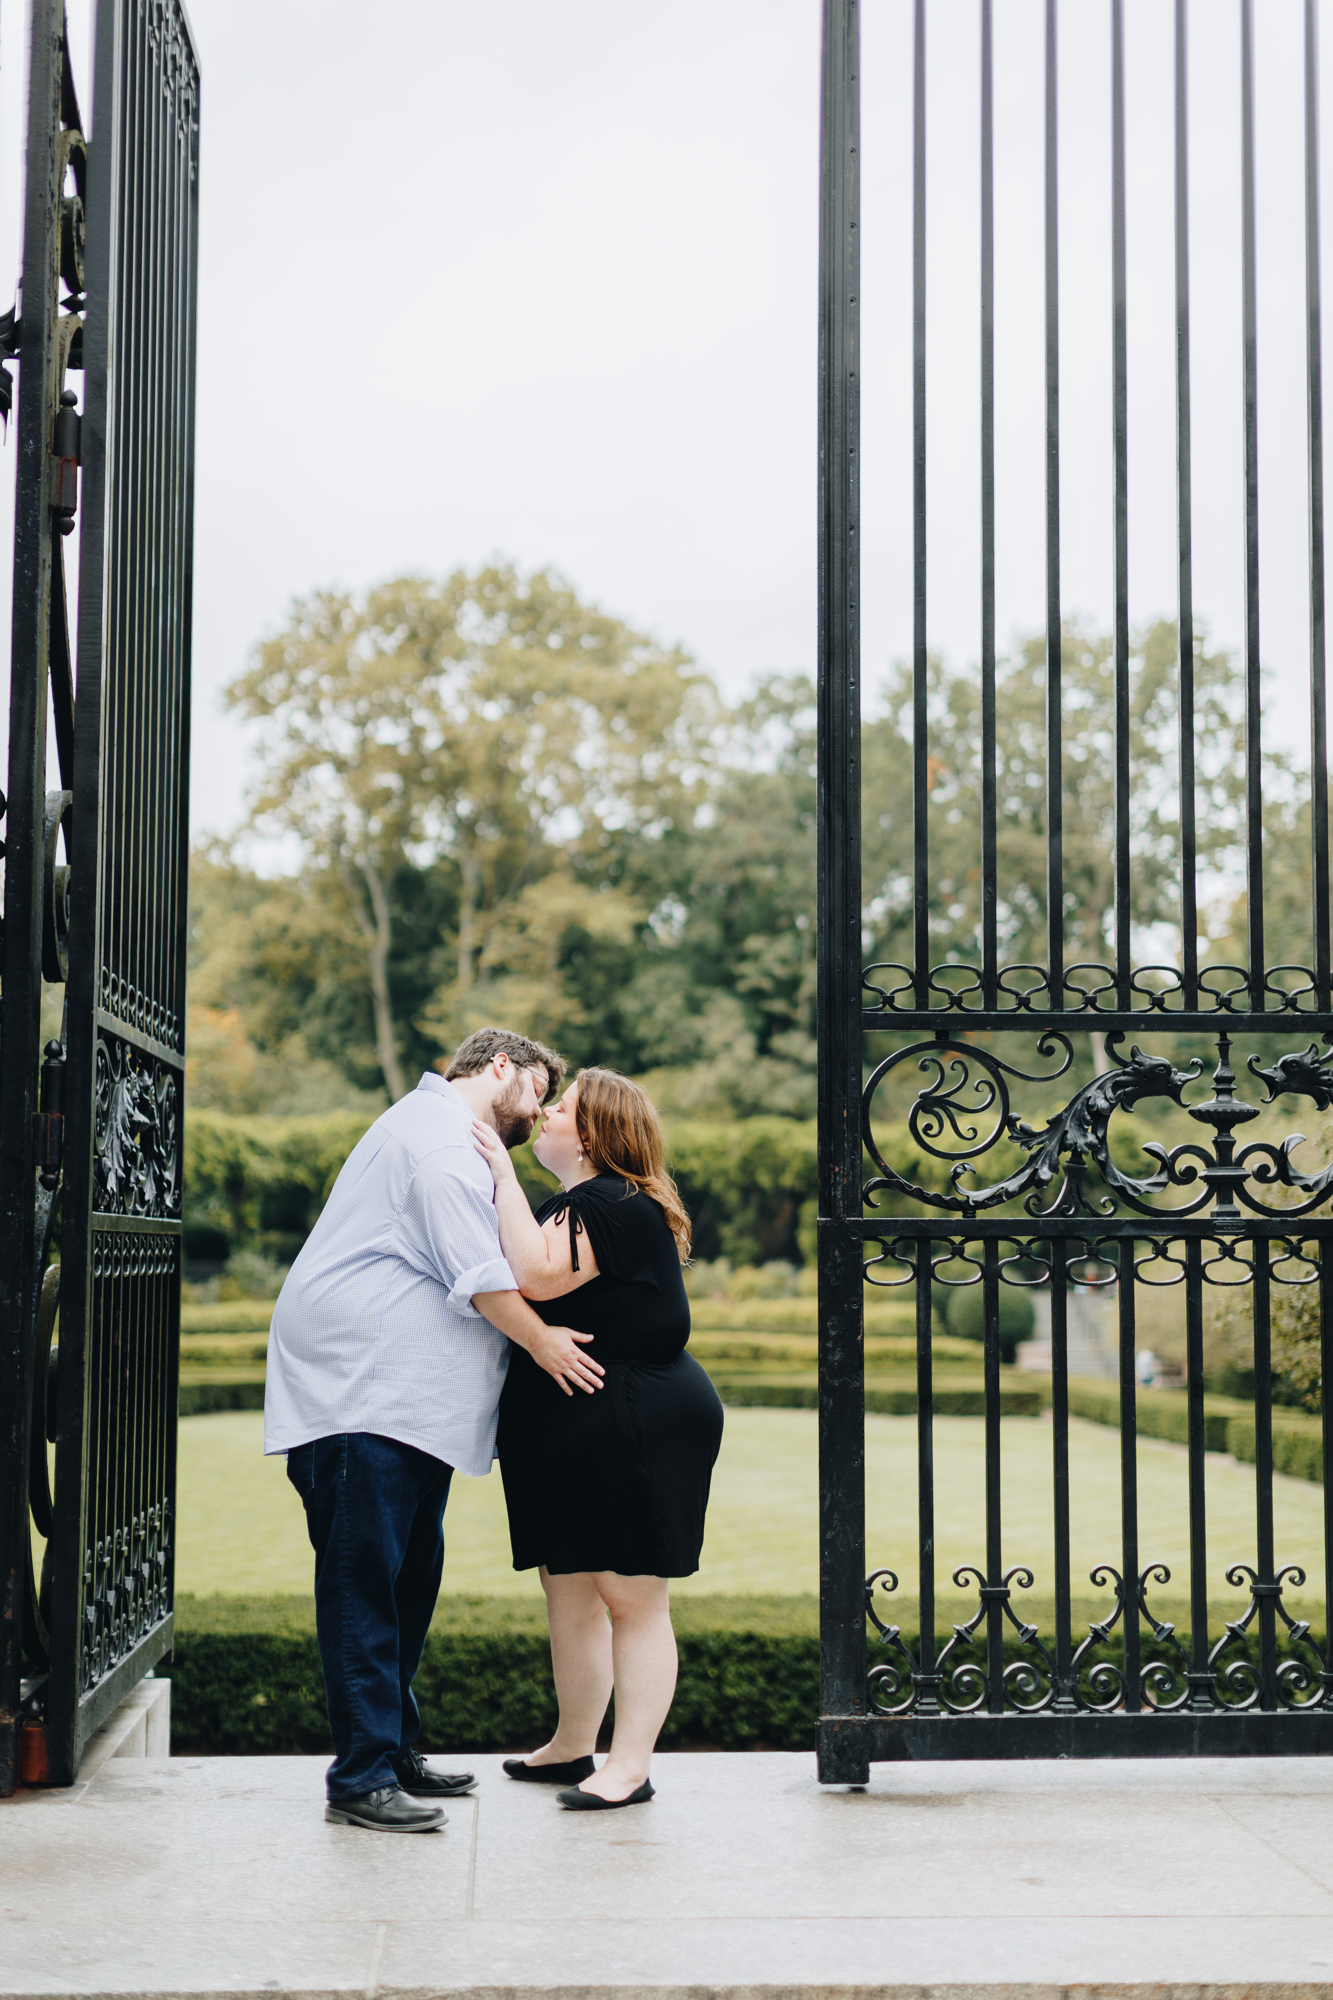 Intimate Autumn Conservatory Garden Engagement Photography